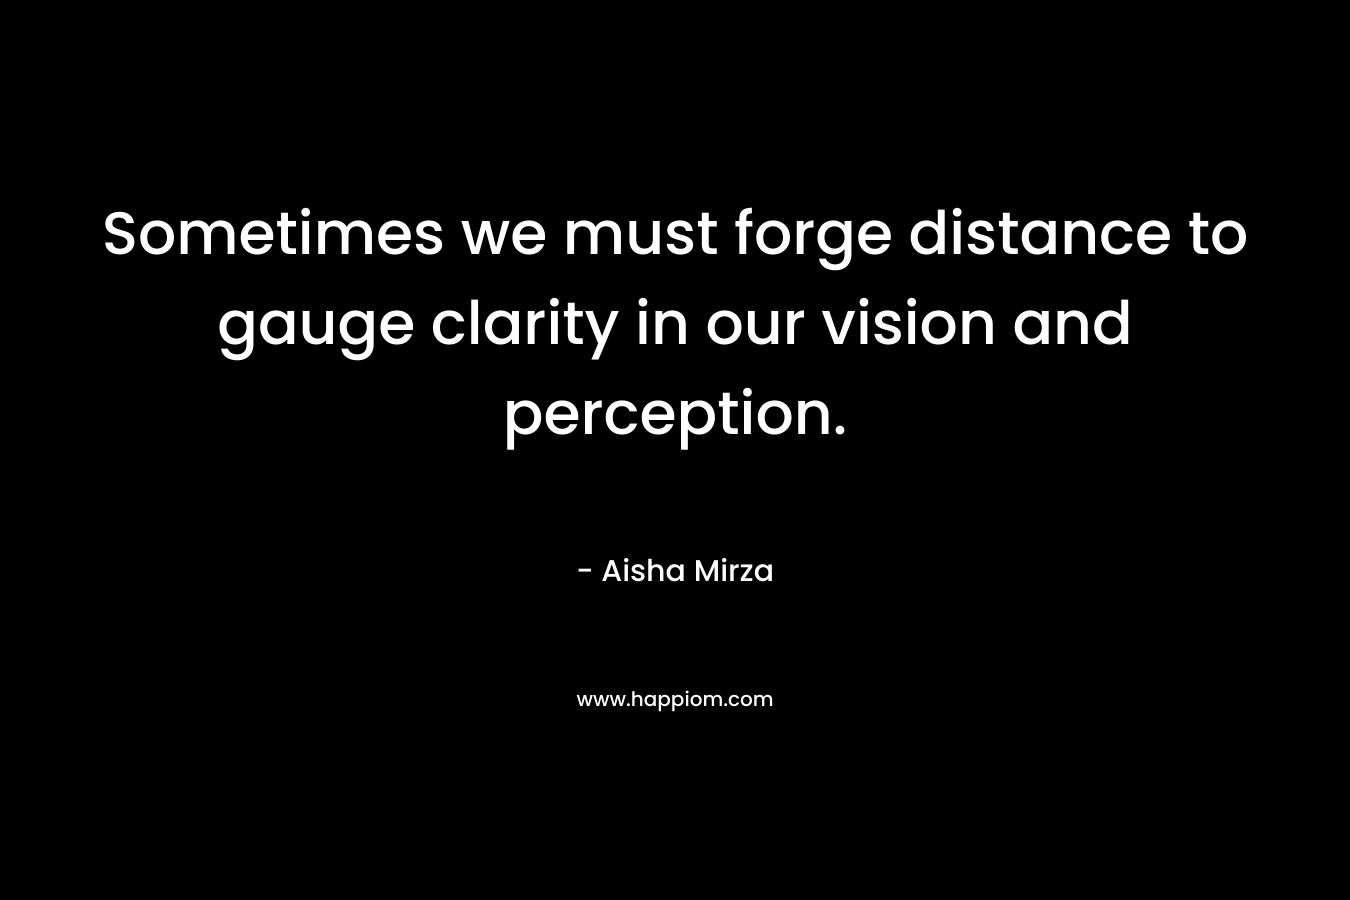 Sometimes we must forge distance to gauge clarity in our vision and perception. – Aisha Mirza